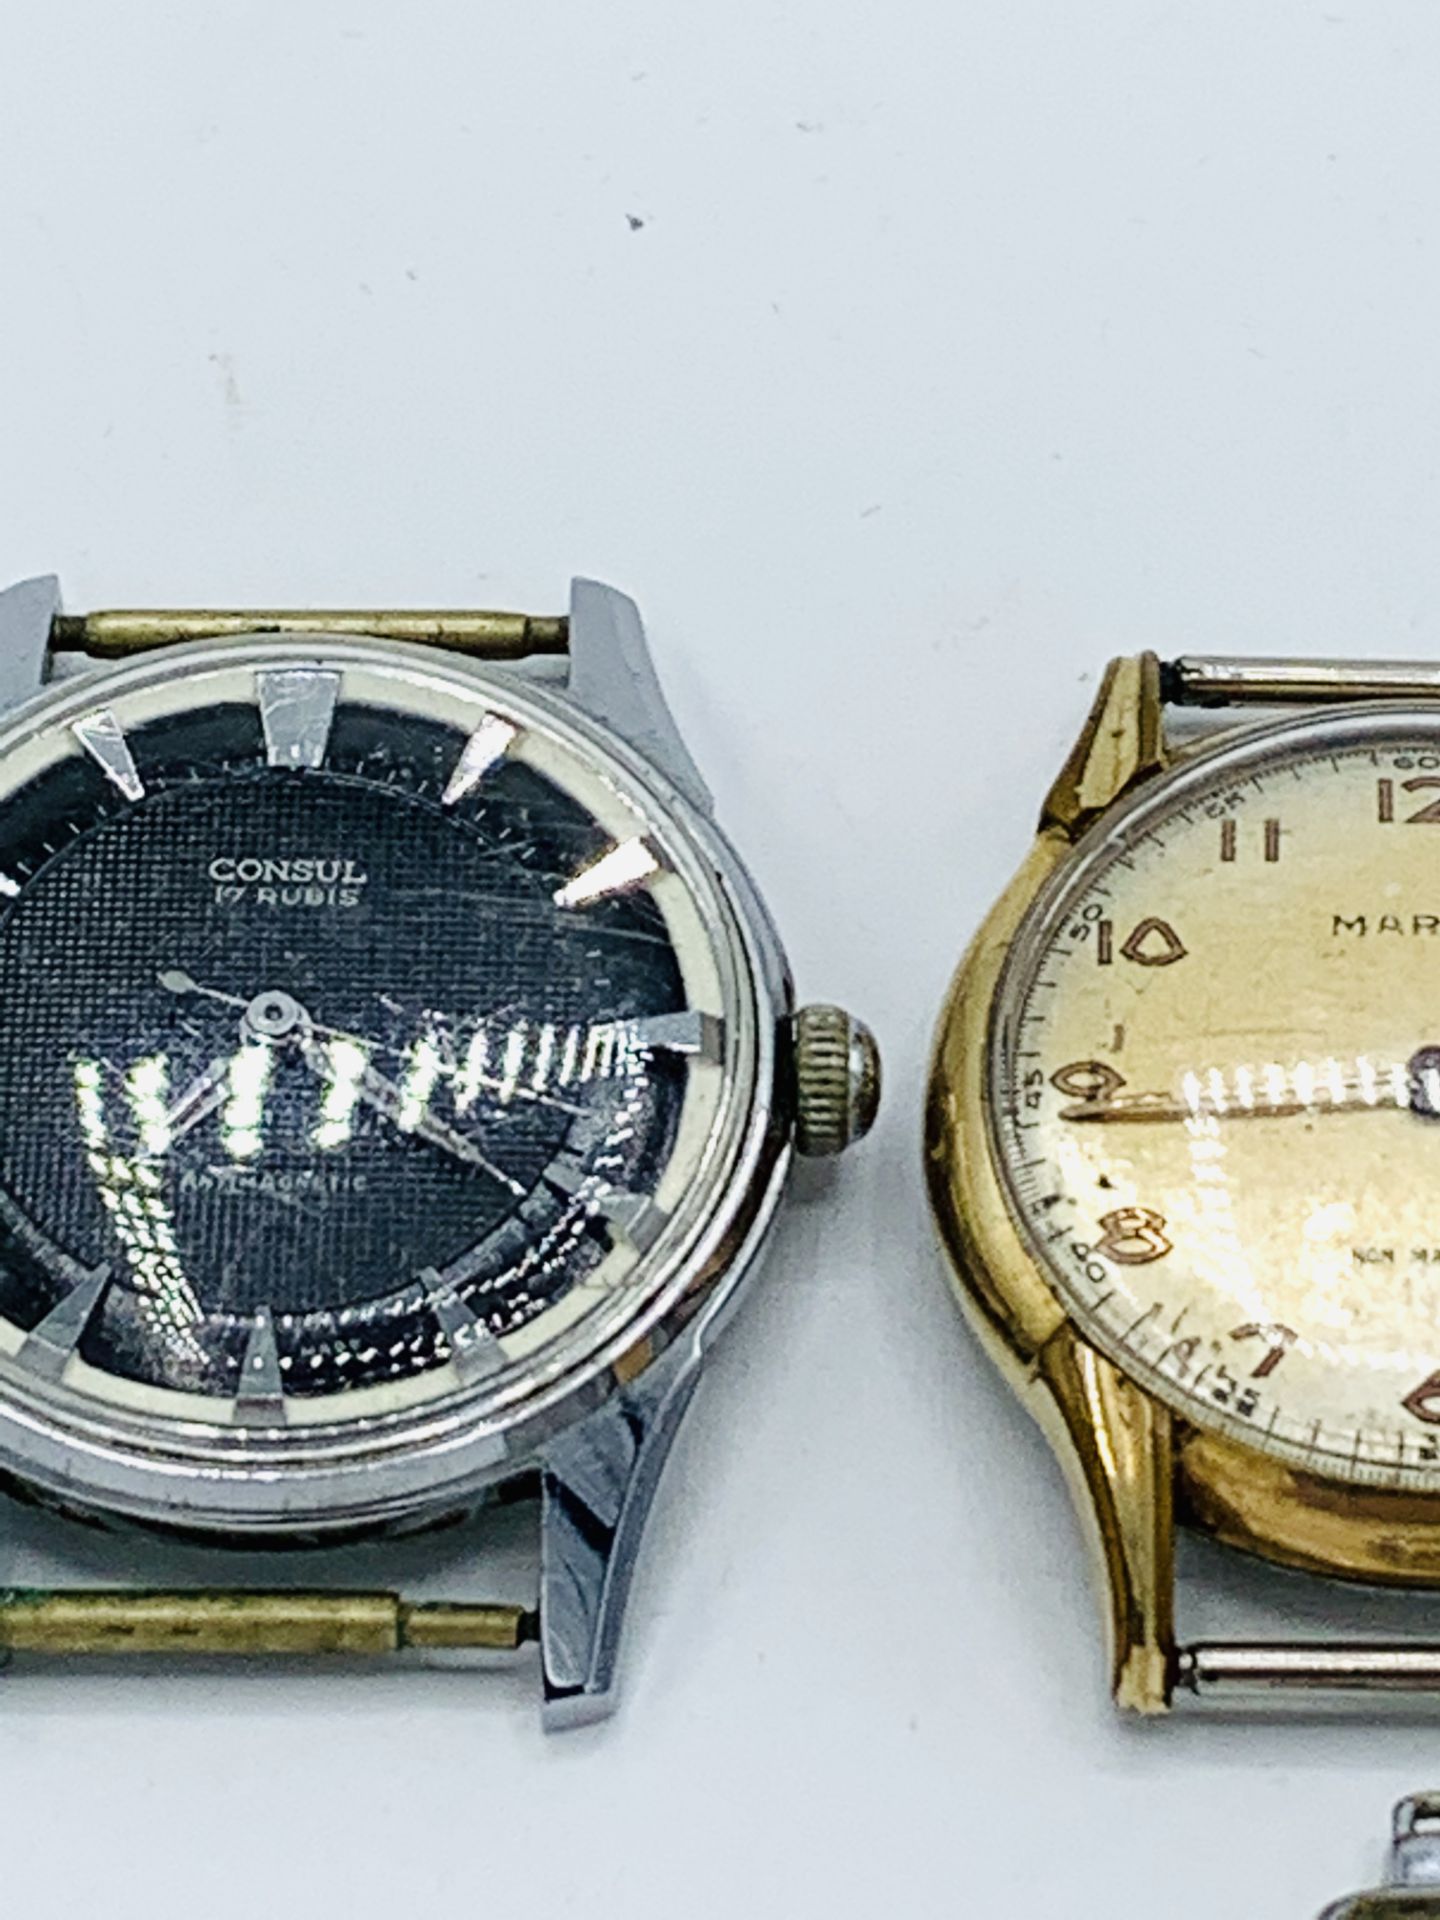 4 various manual wrist watches - Image 3 of 7